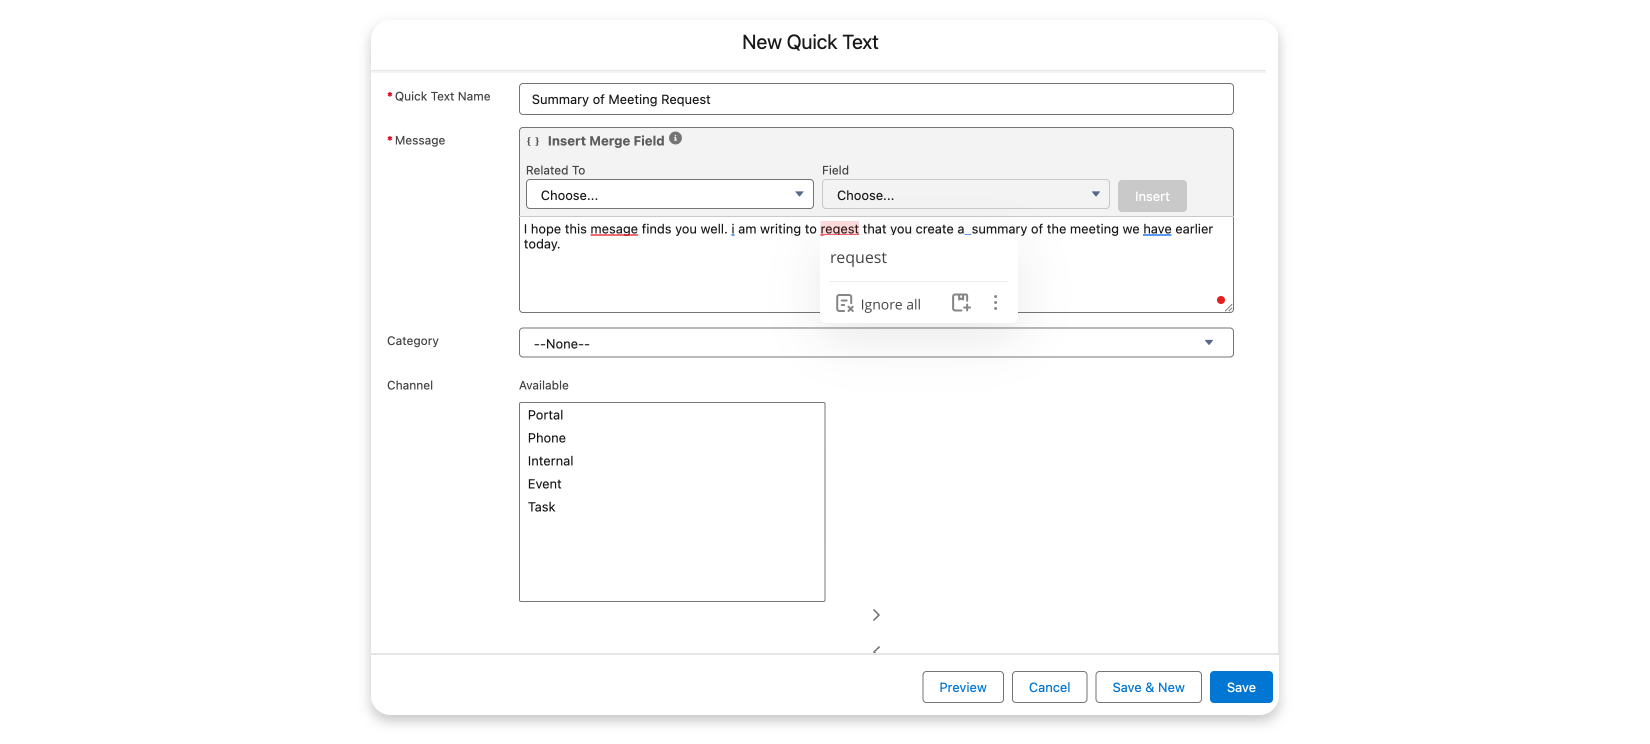 WProofreader browser extension initiated in the Salesforce New Quick Text